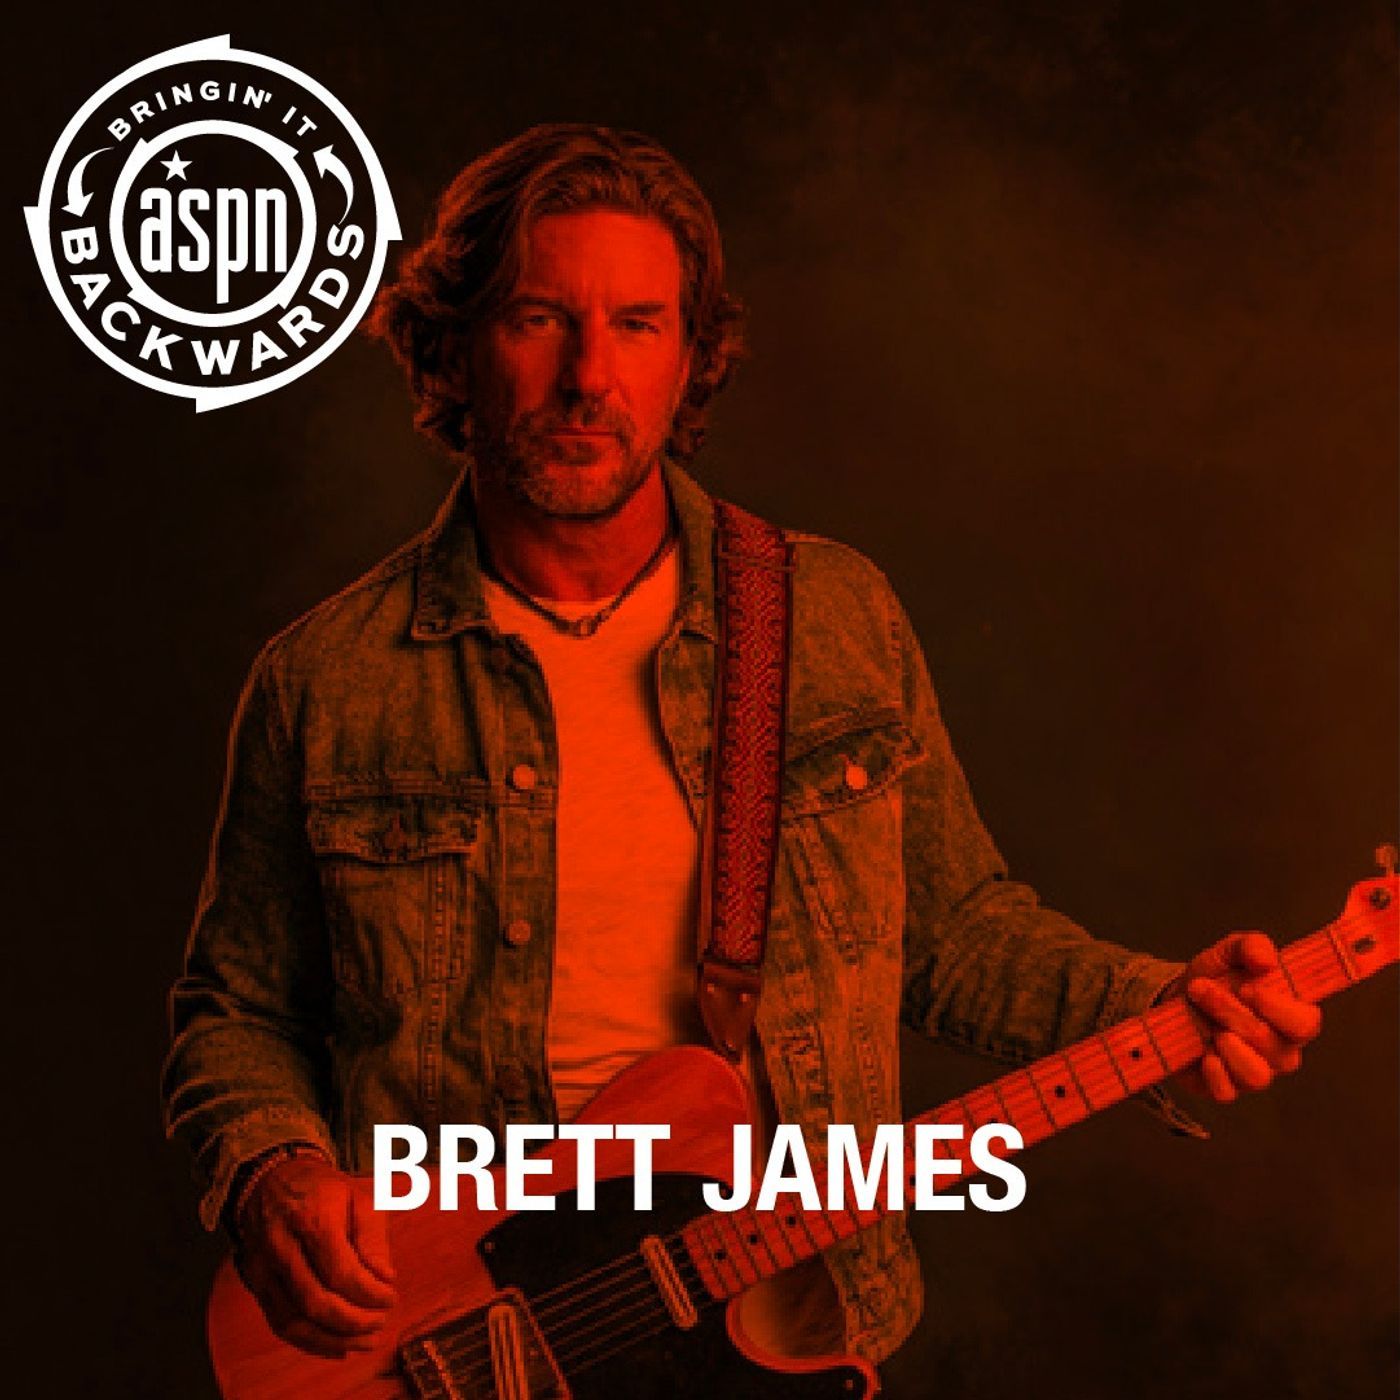 Interview with Brett James Image